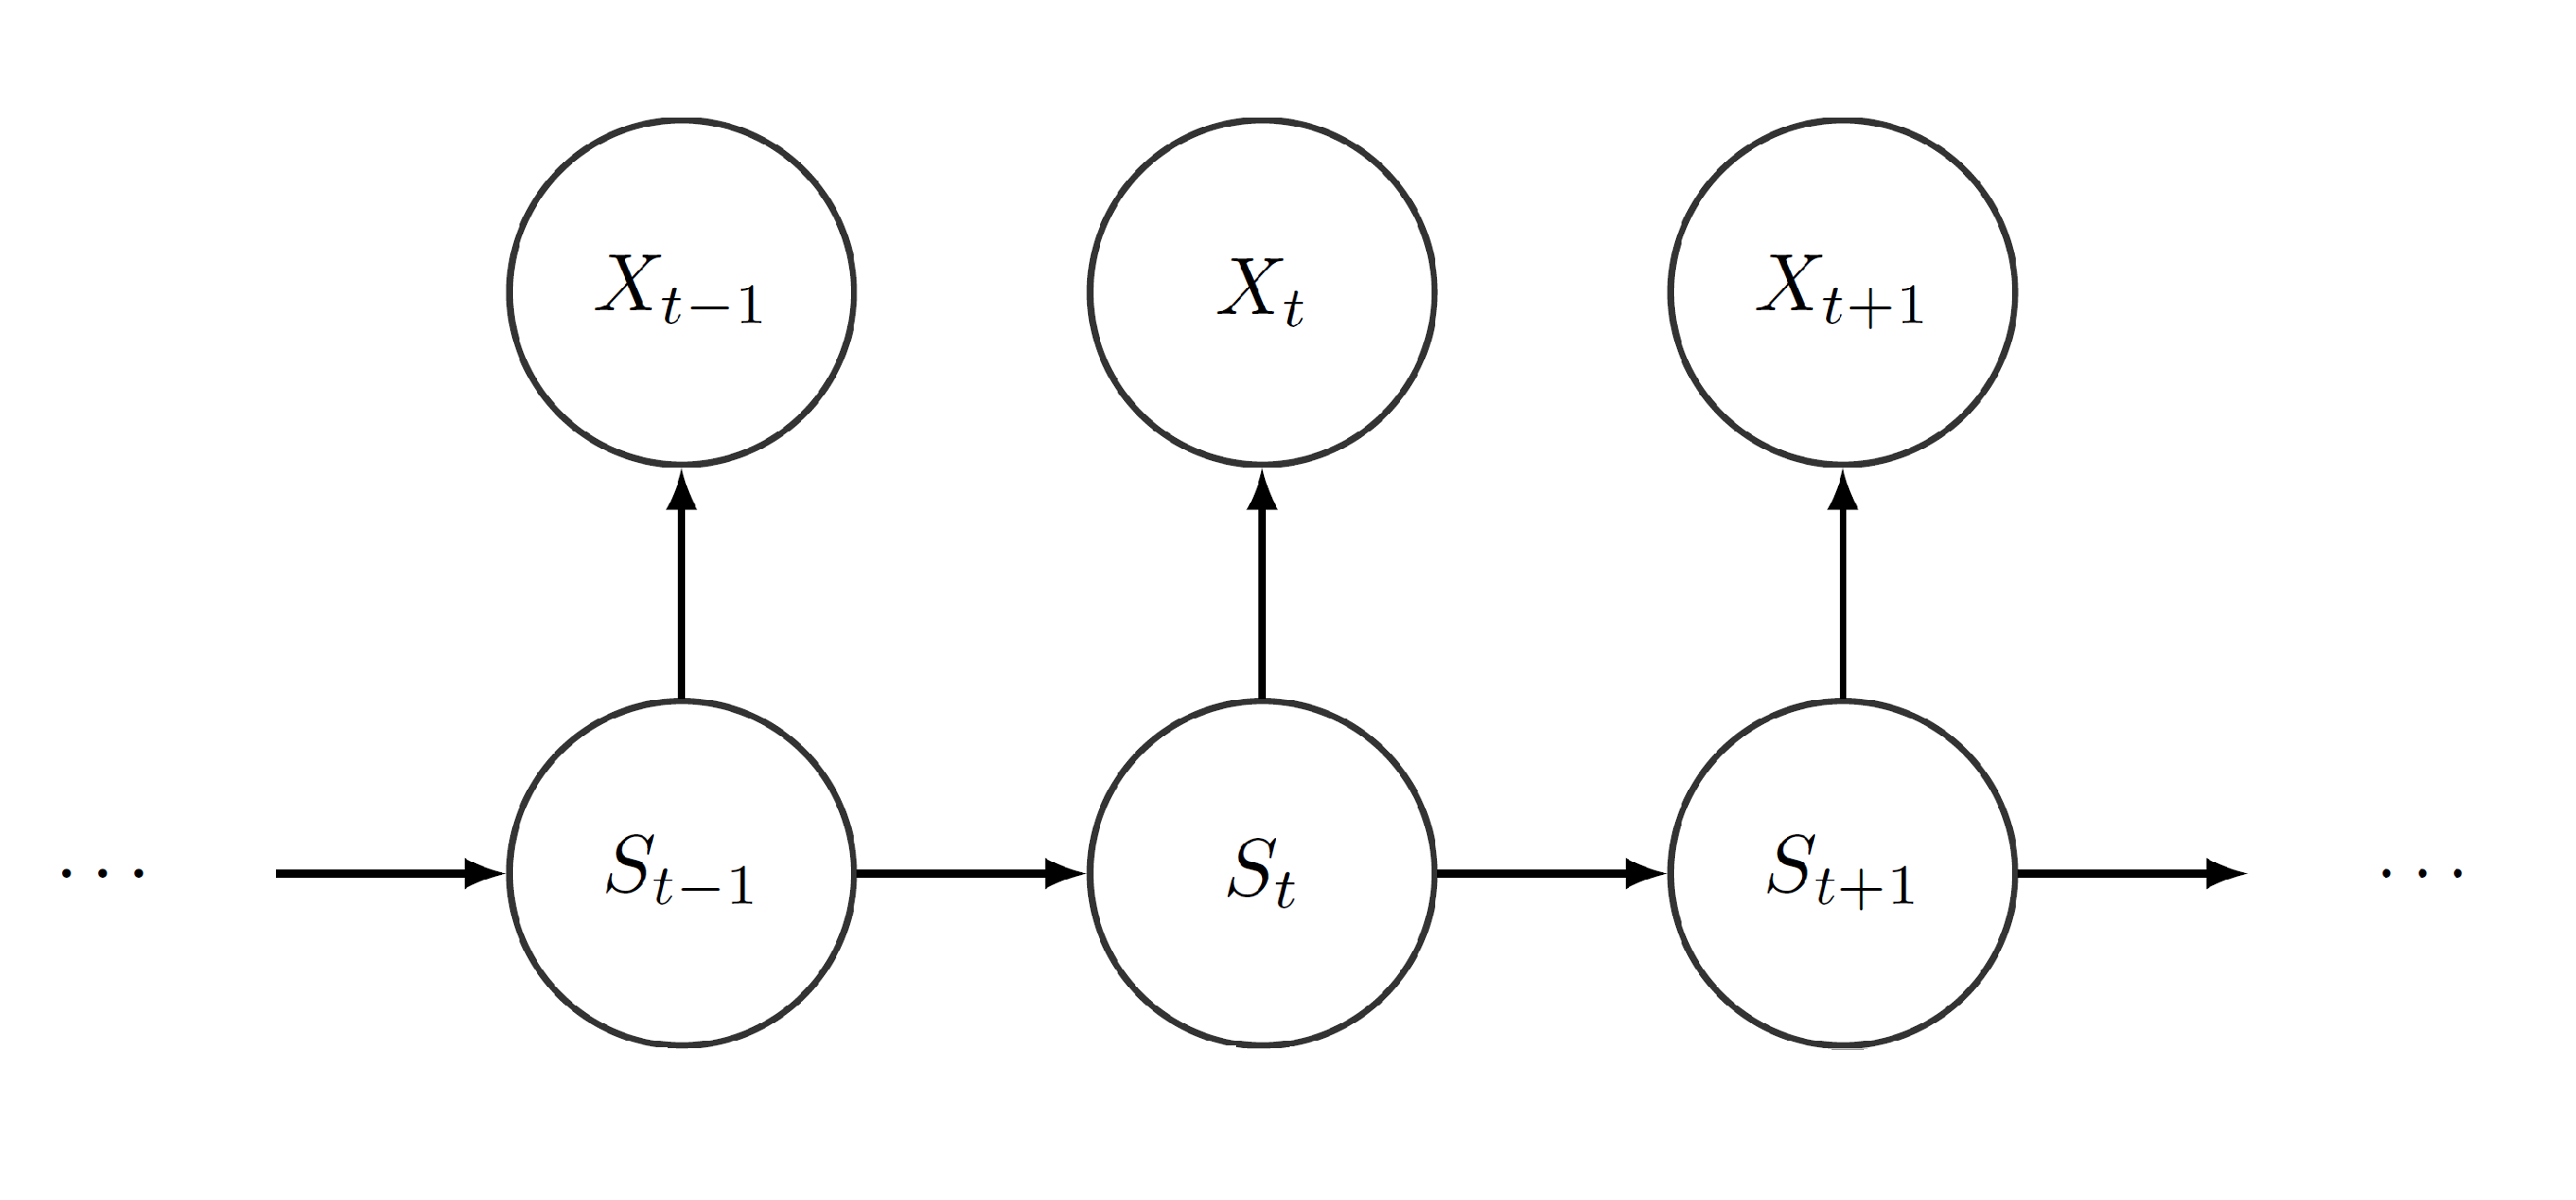 Dependence structure of the HMM.